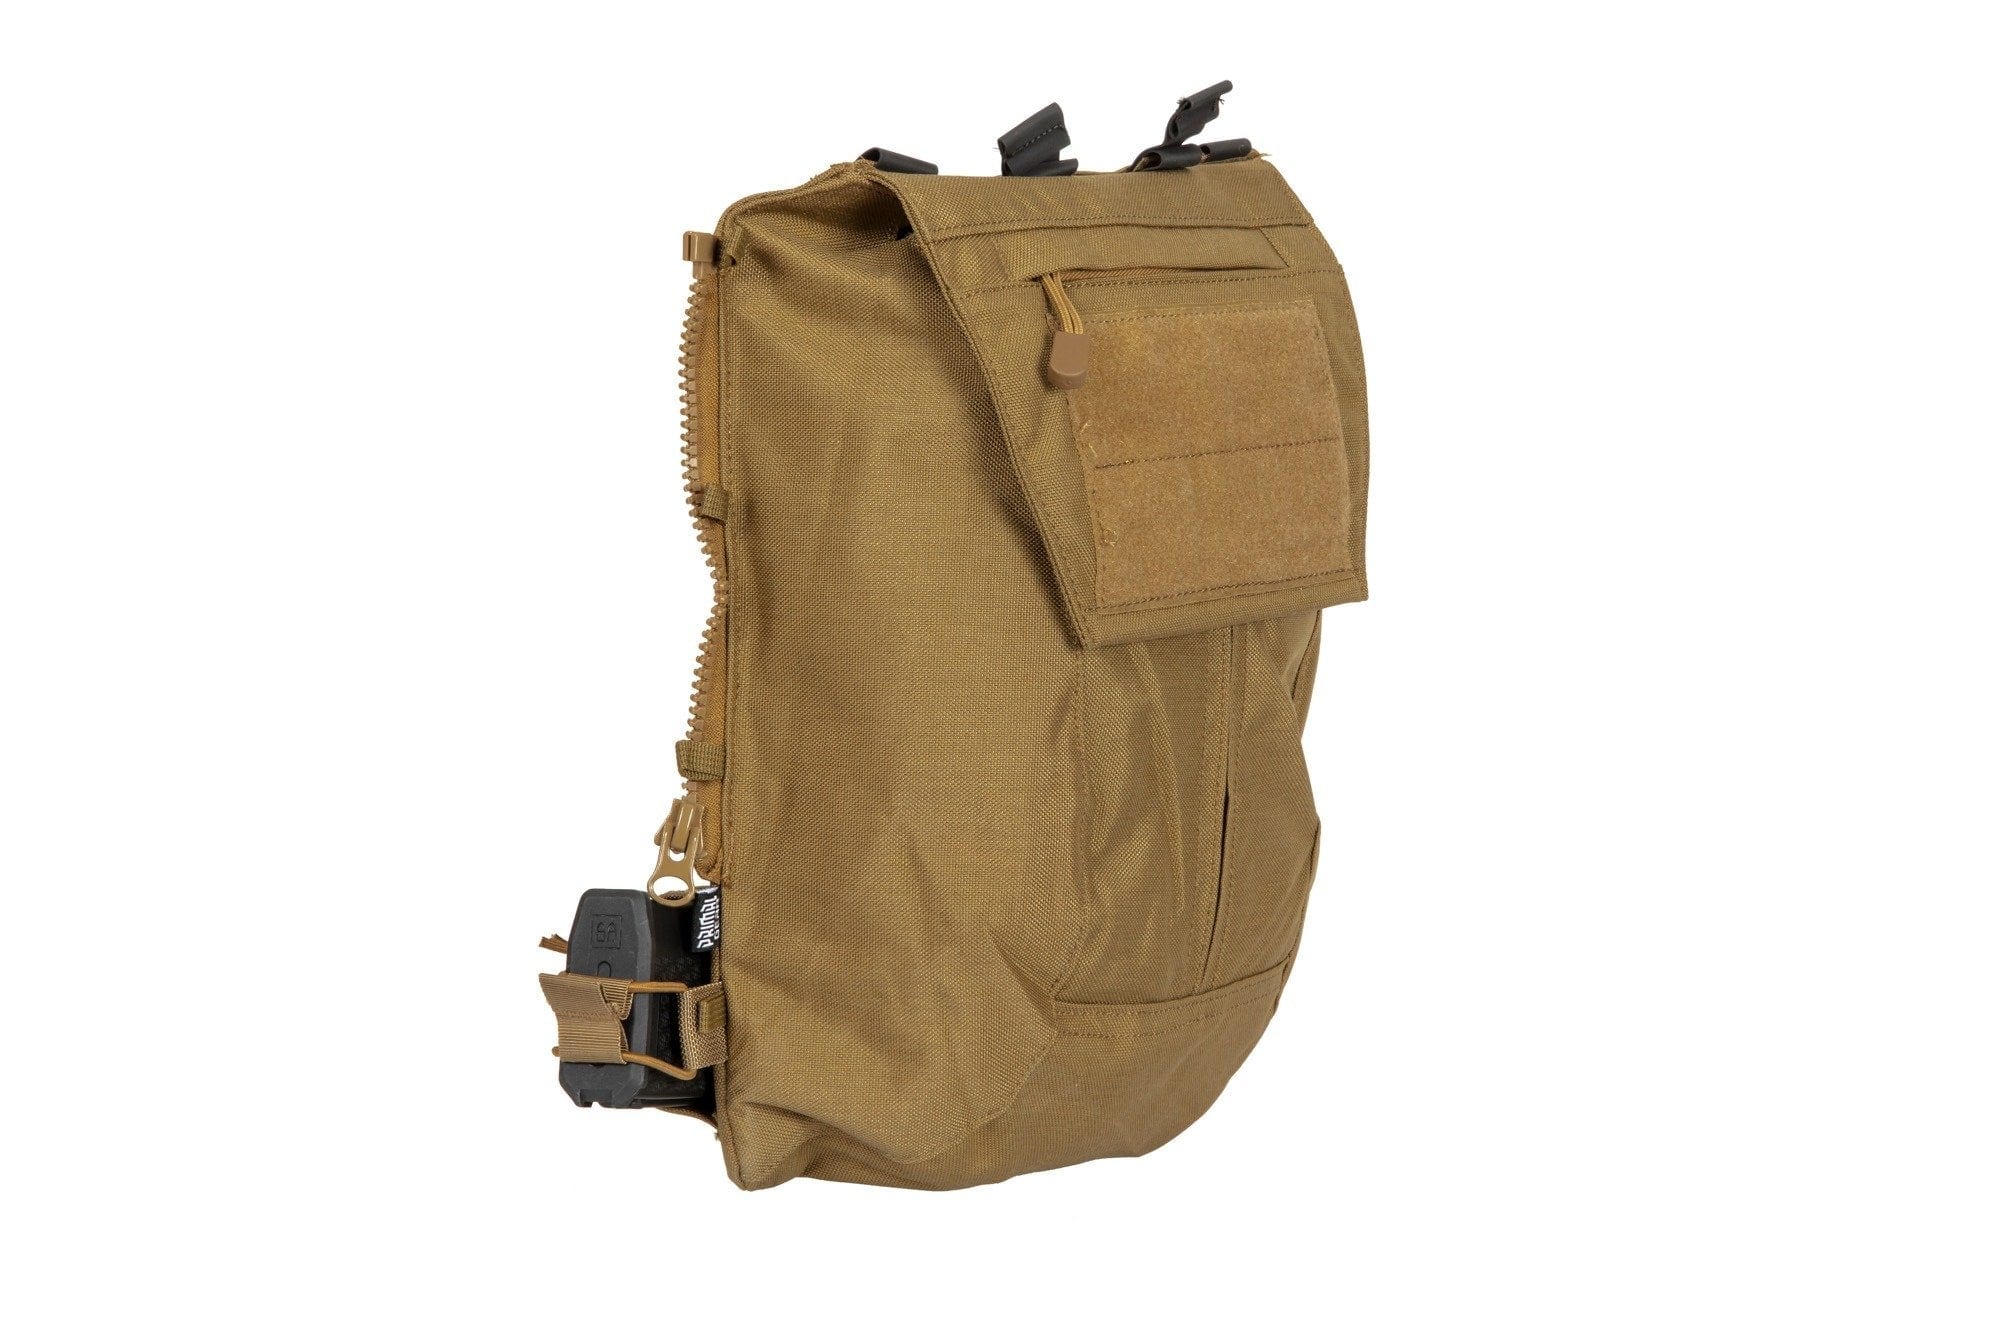 Tactical Backpack for Rush 2.0 Tactical Vest - Tan